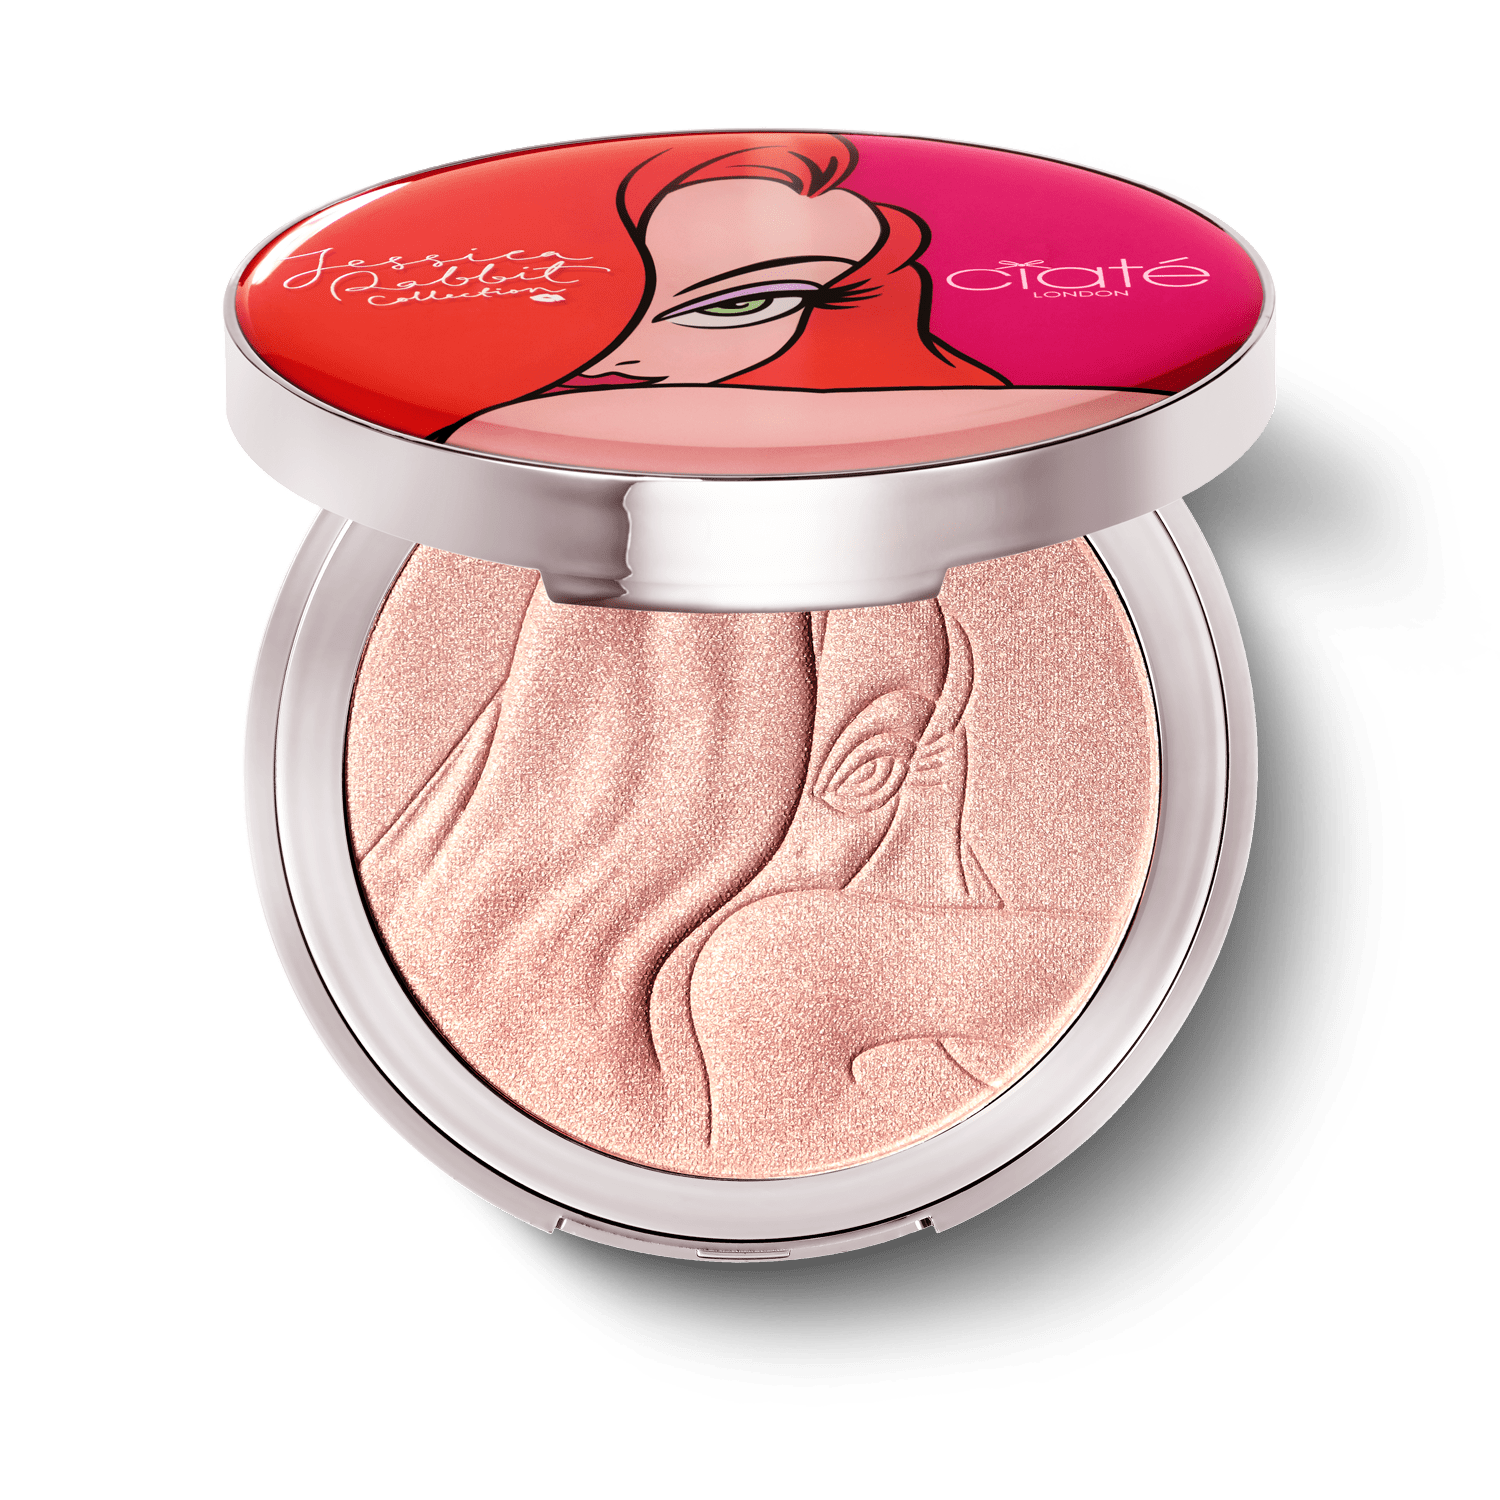 Jessica Rabbit - Glow To Highlighter: Roger, Darling!